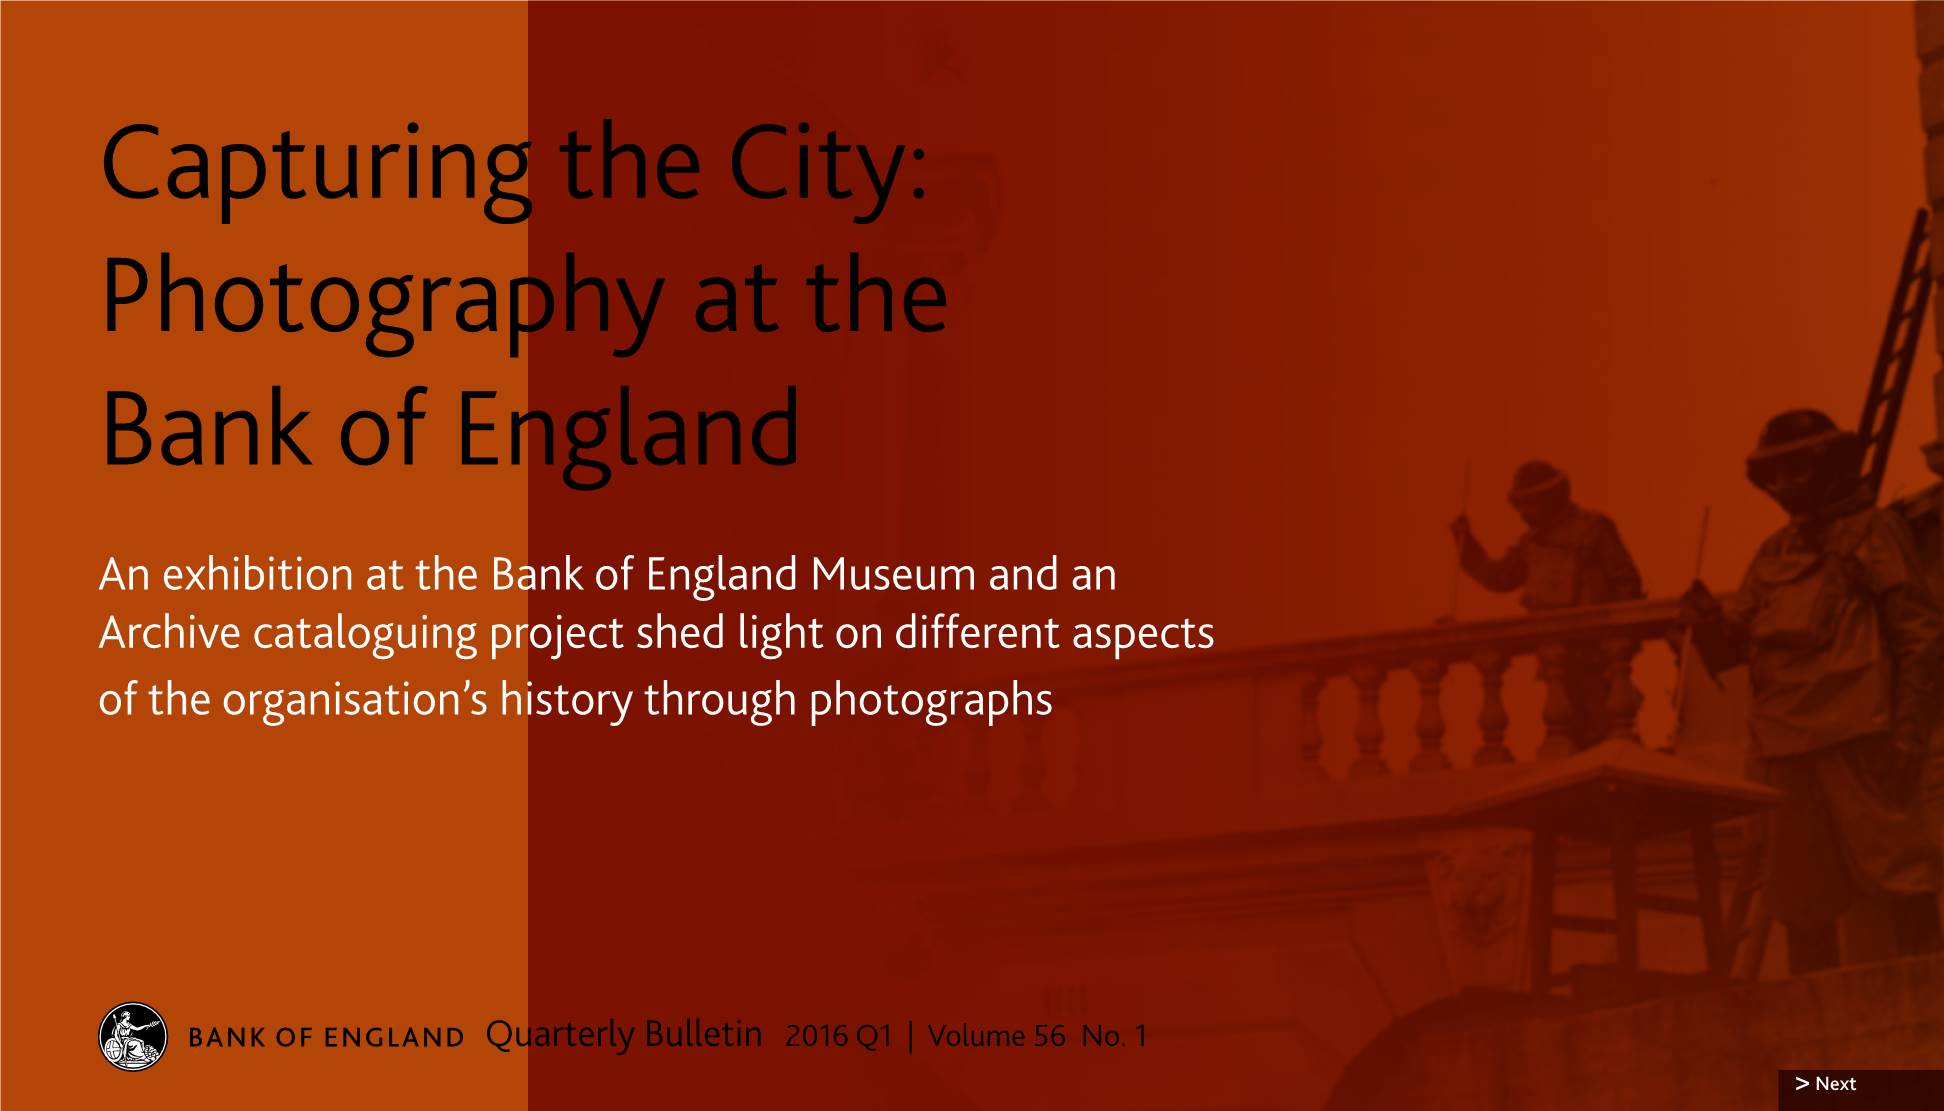 Capturing the City: Photography at the Bank of England